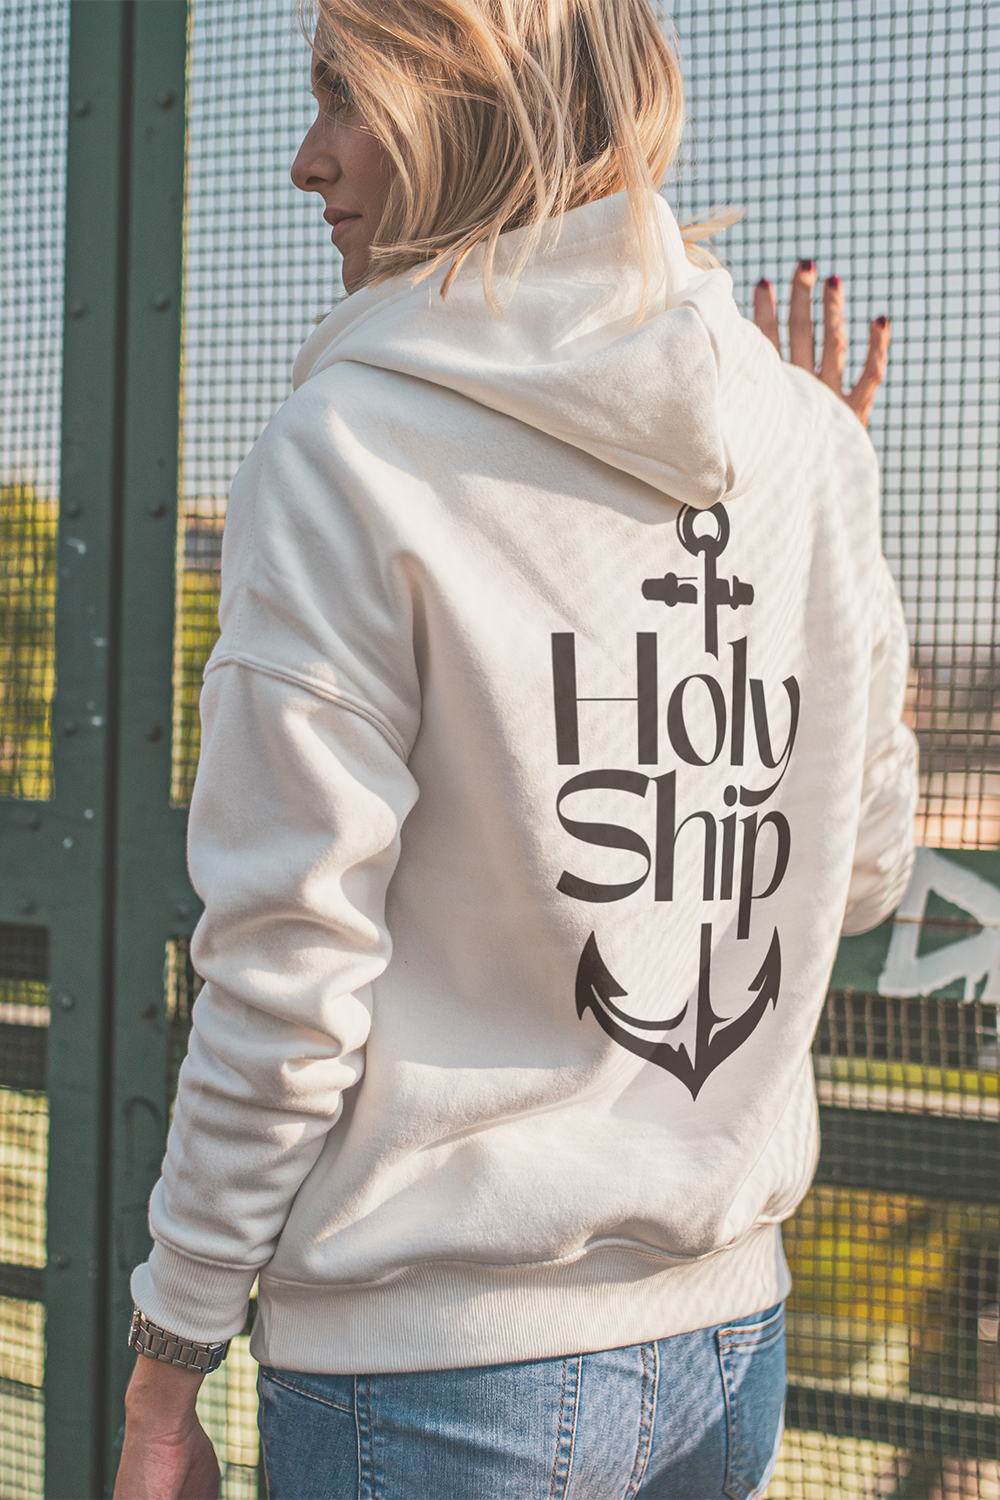 Holy Ship Hoodie, Clothing, Apparell, Holy Ship Pullover, Bekleidung Holy Ship, Tshirt Holy Ship, Clothing Store, Fashion Shop, Maritime Bekleidung, Fashion Shop, Fashion Store, Ship Fashion, Ship Clothing, Maritime Store Clothing, Bekleidung Store, DJ Bekleidung, Trend Bekleidung, KI;